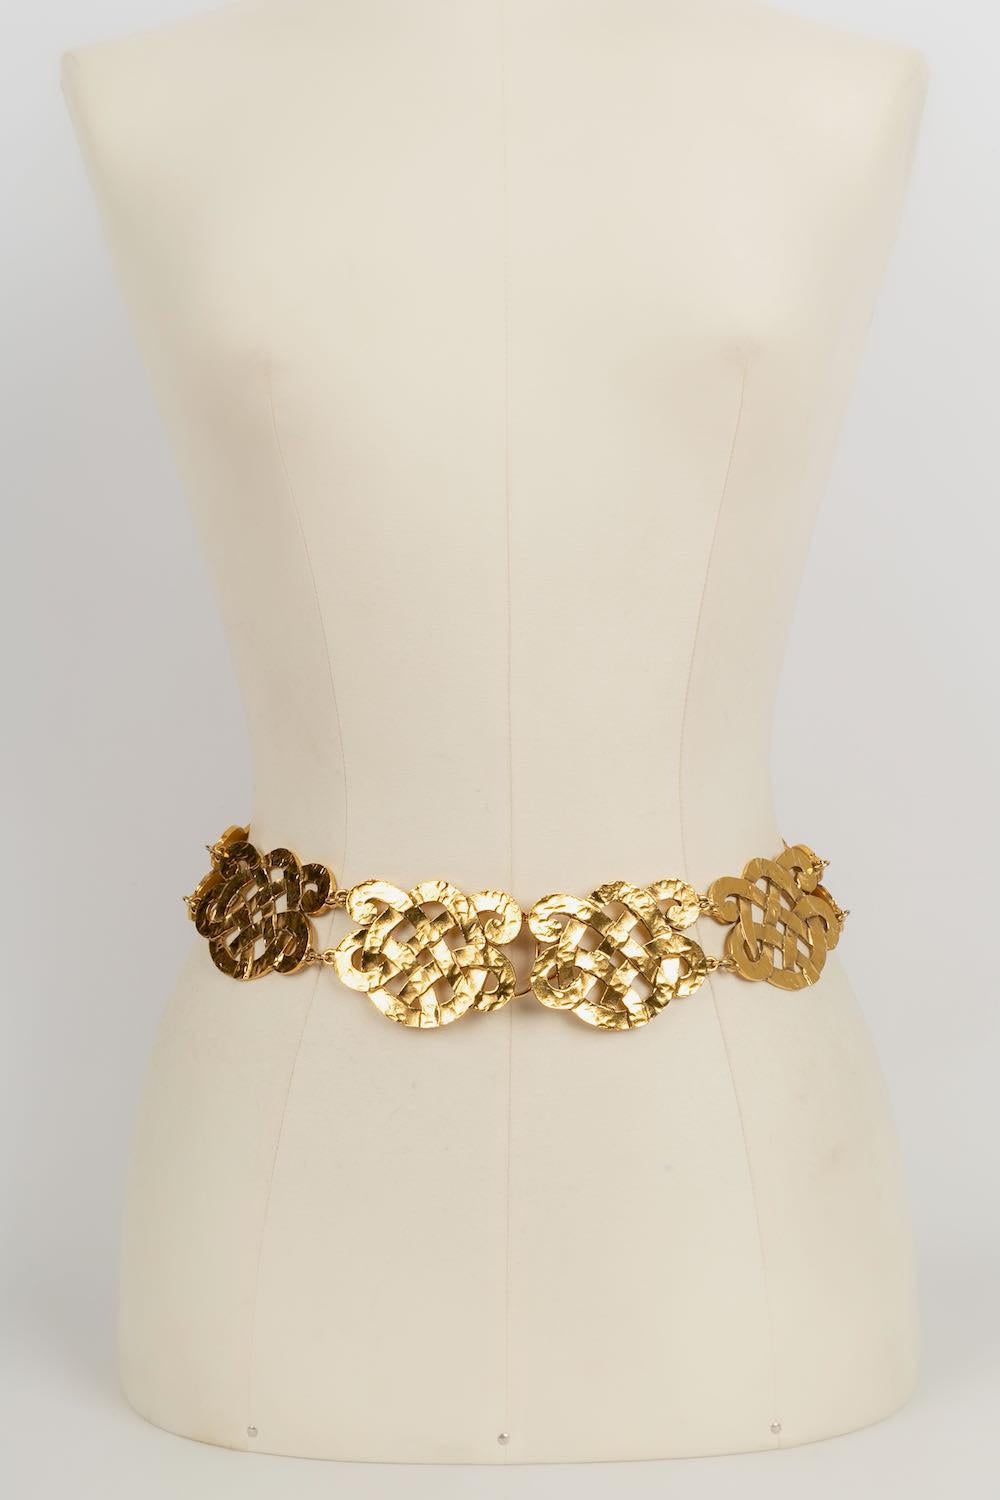 Chanel -Golden metal belt. Ready-to-wear collection Fall/Winter 1989/90.

Additional information: 
Dimensions: Length: 68 cm
Condition: Very good condition
Seller Ref number: CCB47